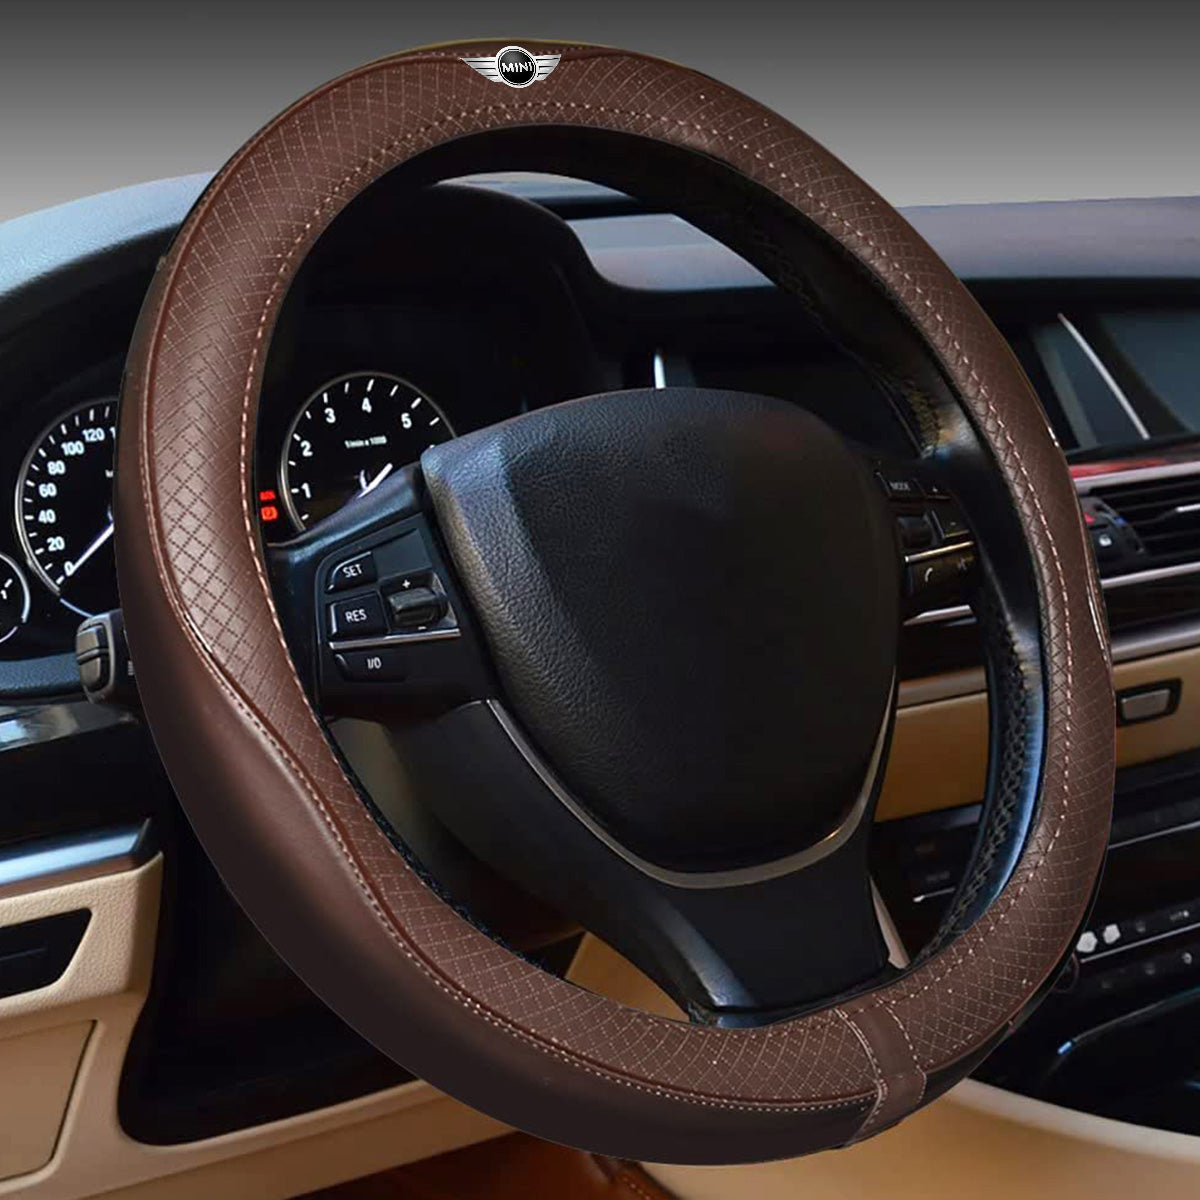 Enhance Your Ride with a Stylish Mini Cooper Steering Wheel Cover